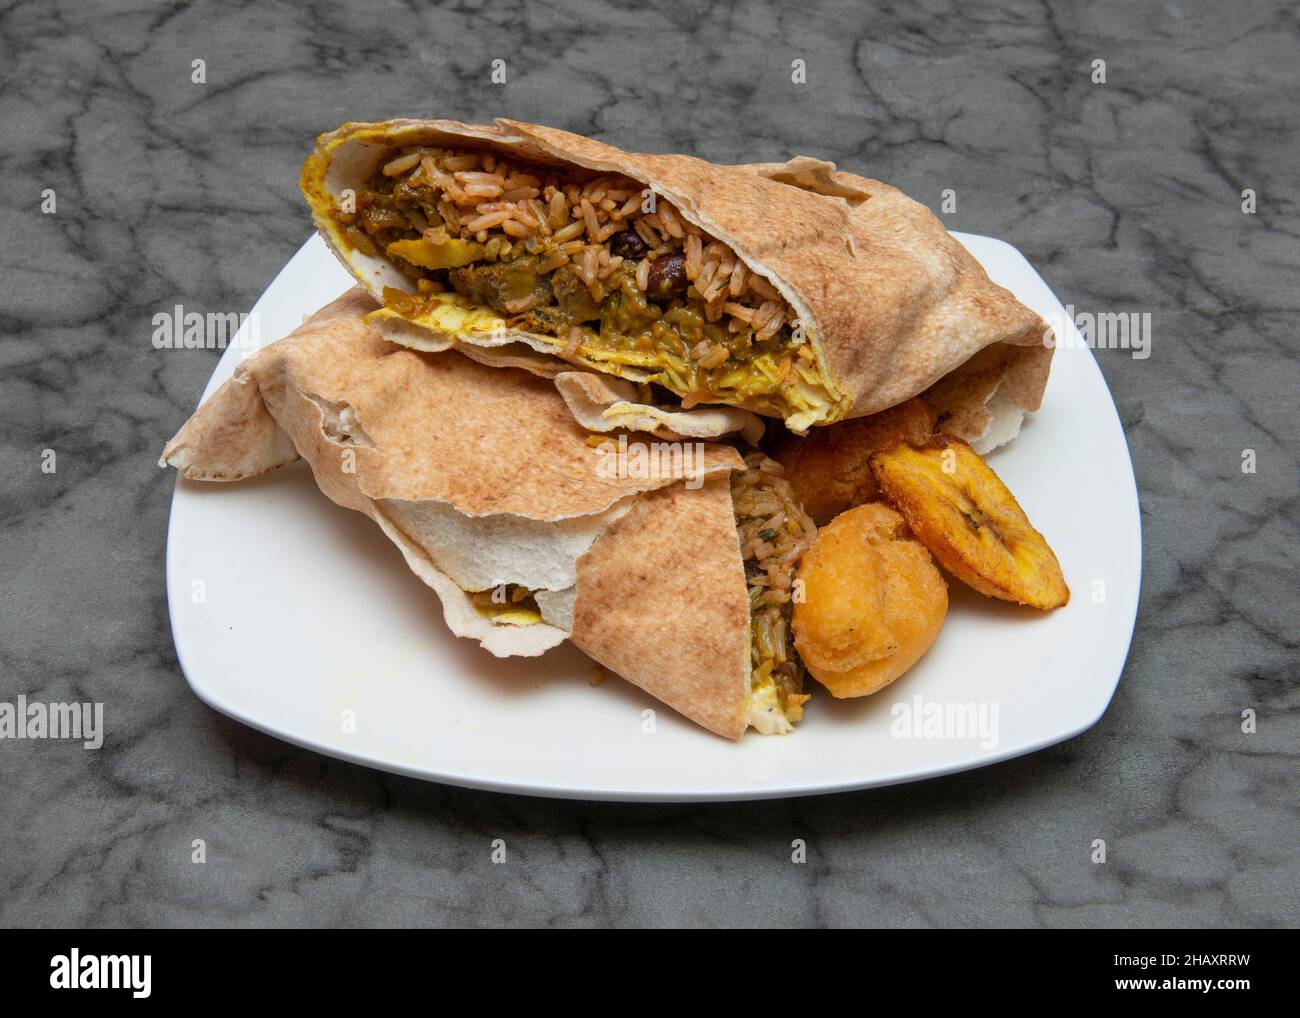 Curried goat wrap Jamaican & West Indian Food Stock Photo